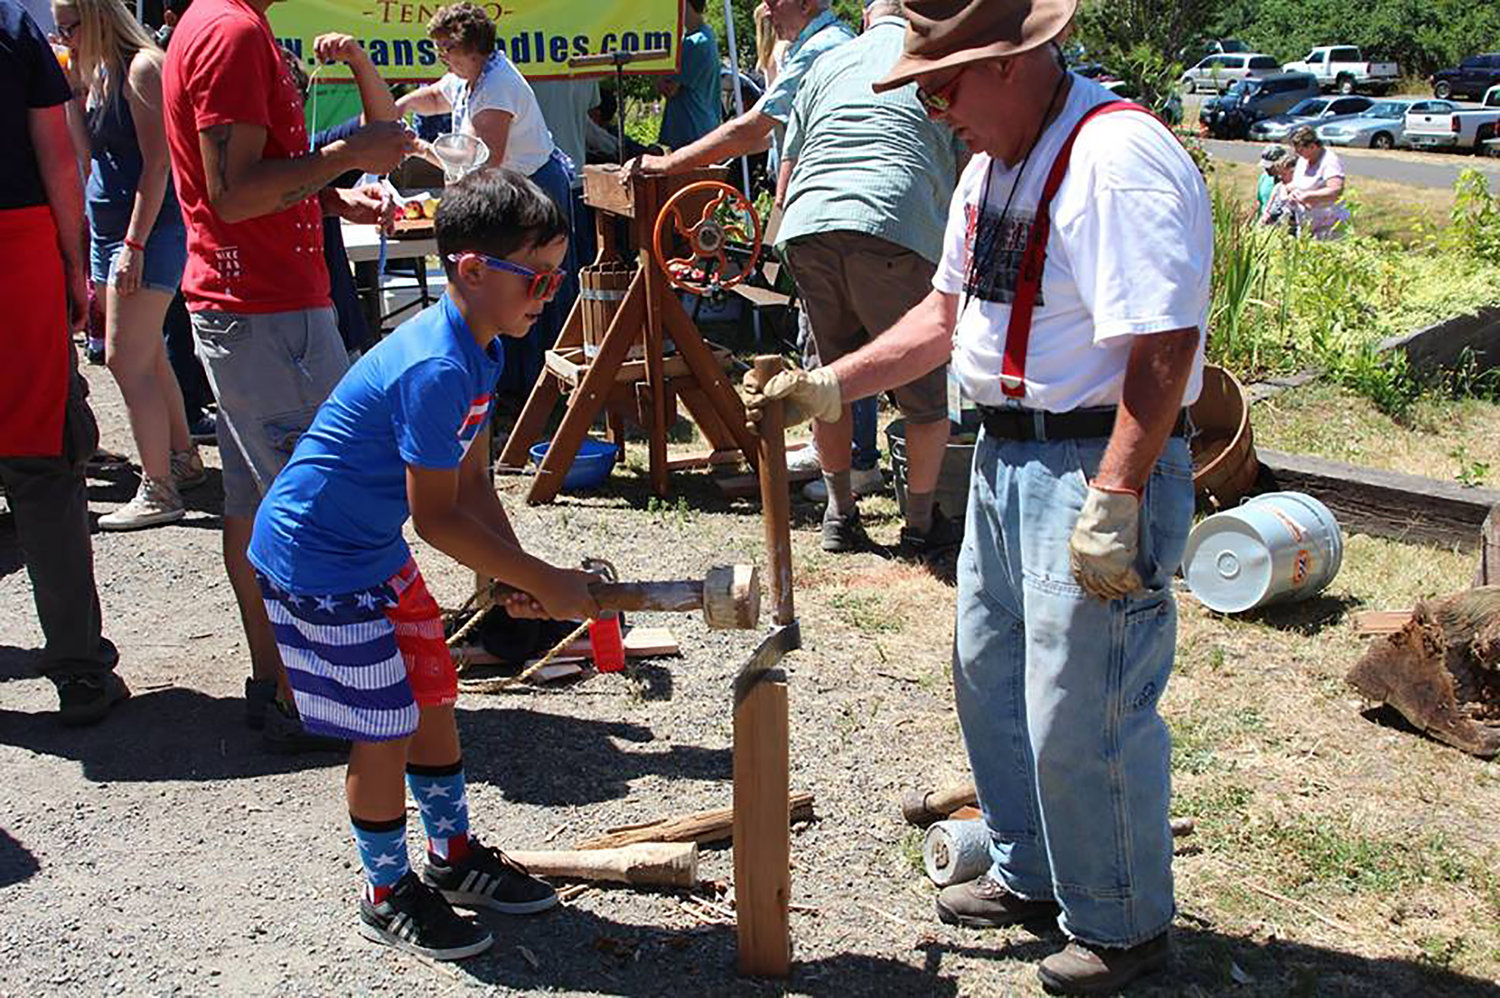 The Pioneer Village at Tenino's Oregon Trail Days gives attendees the chance to experience historical activities.